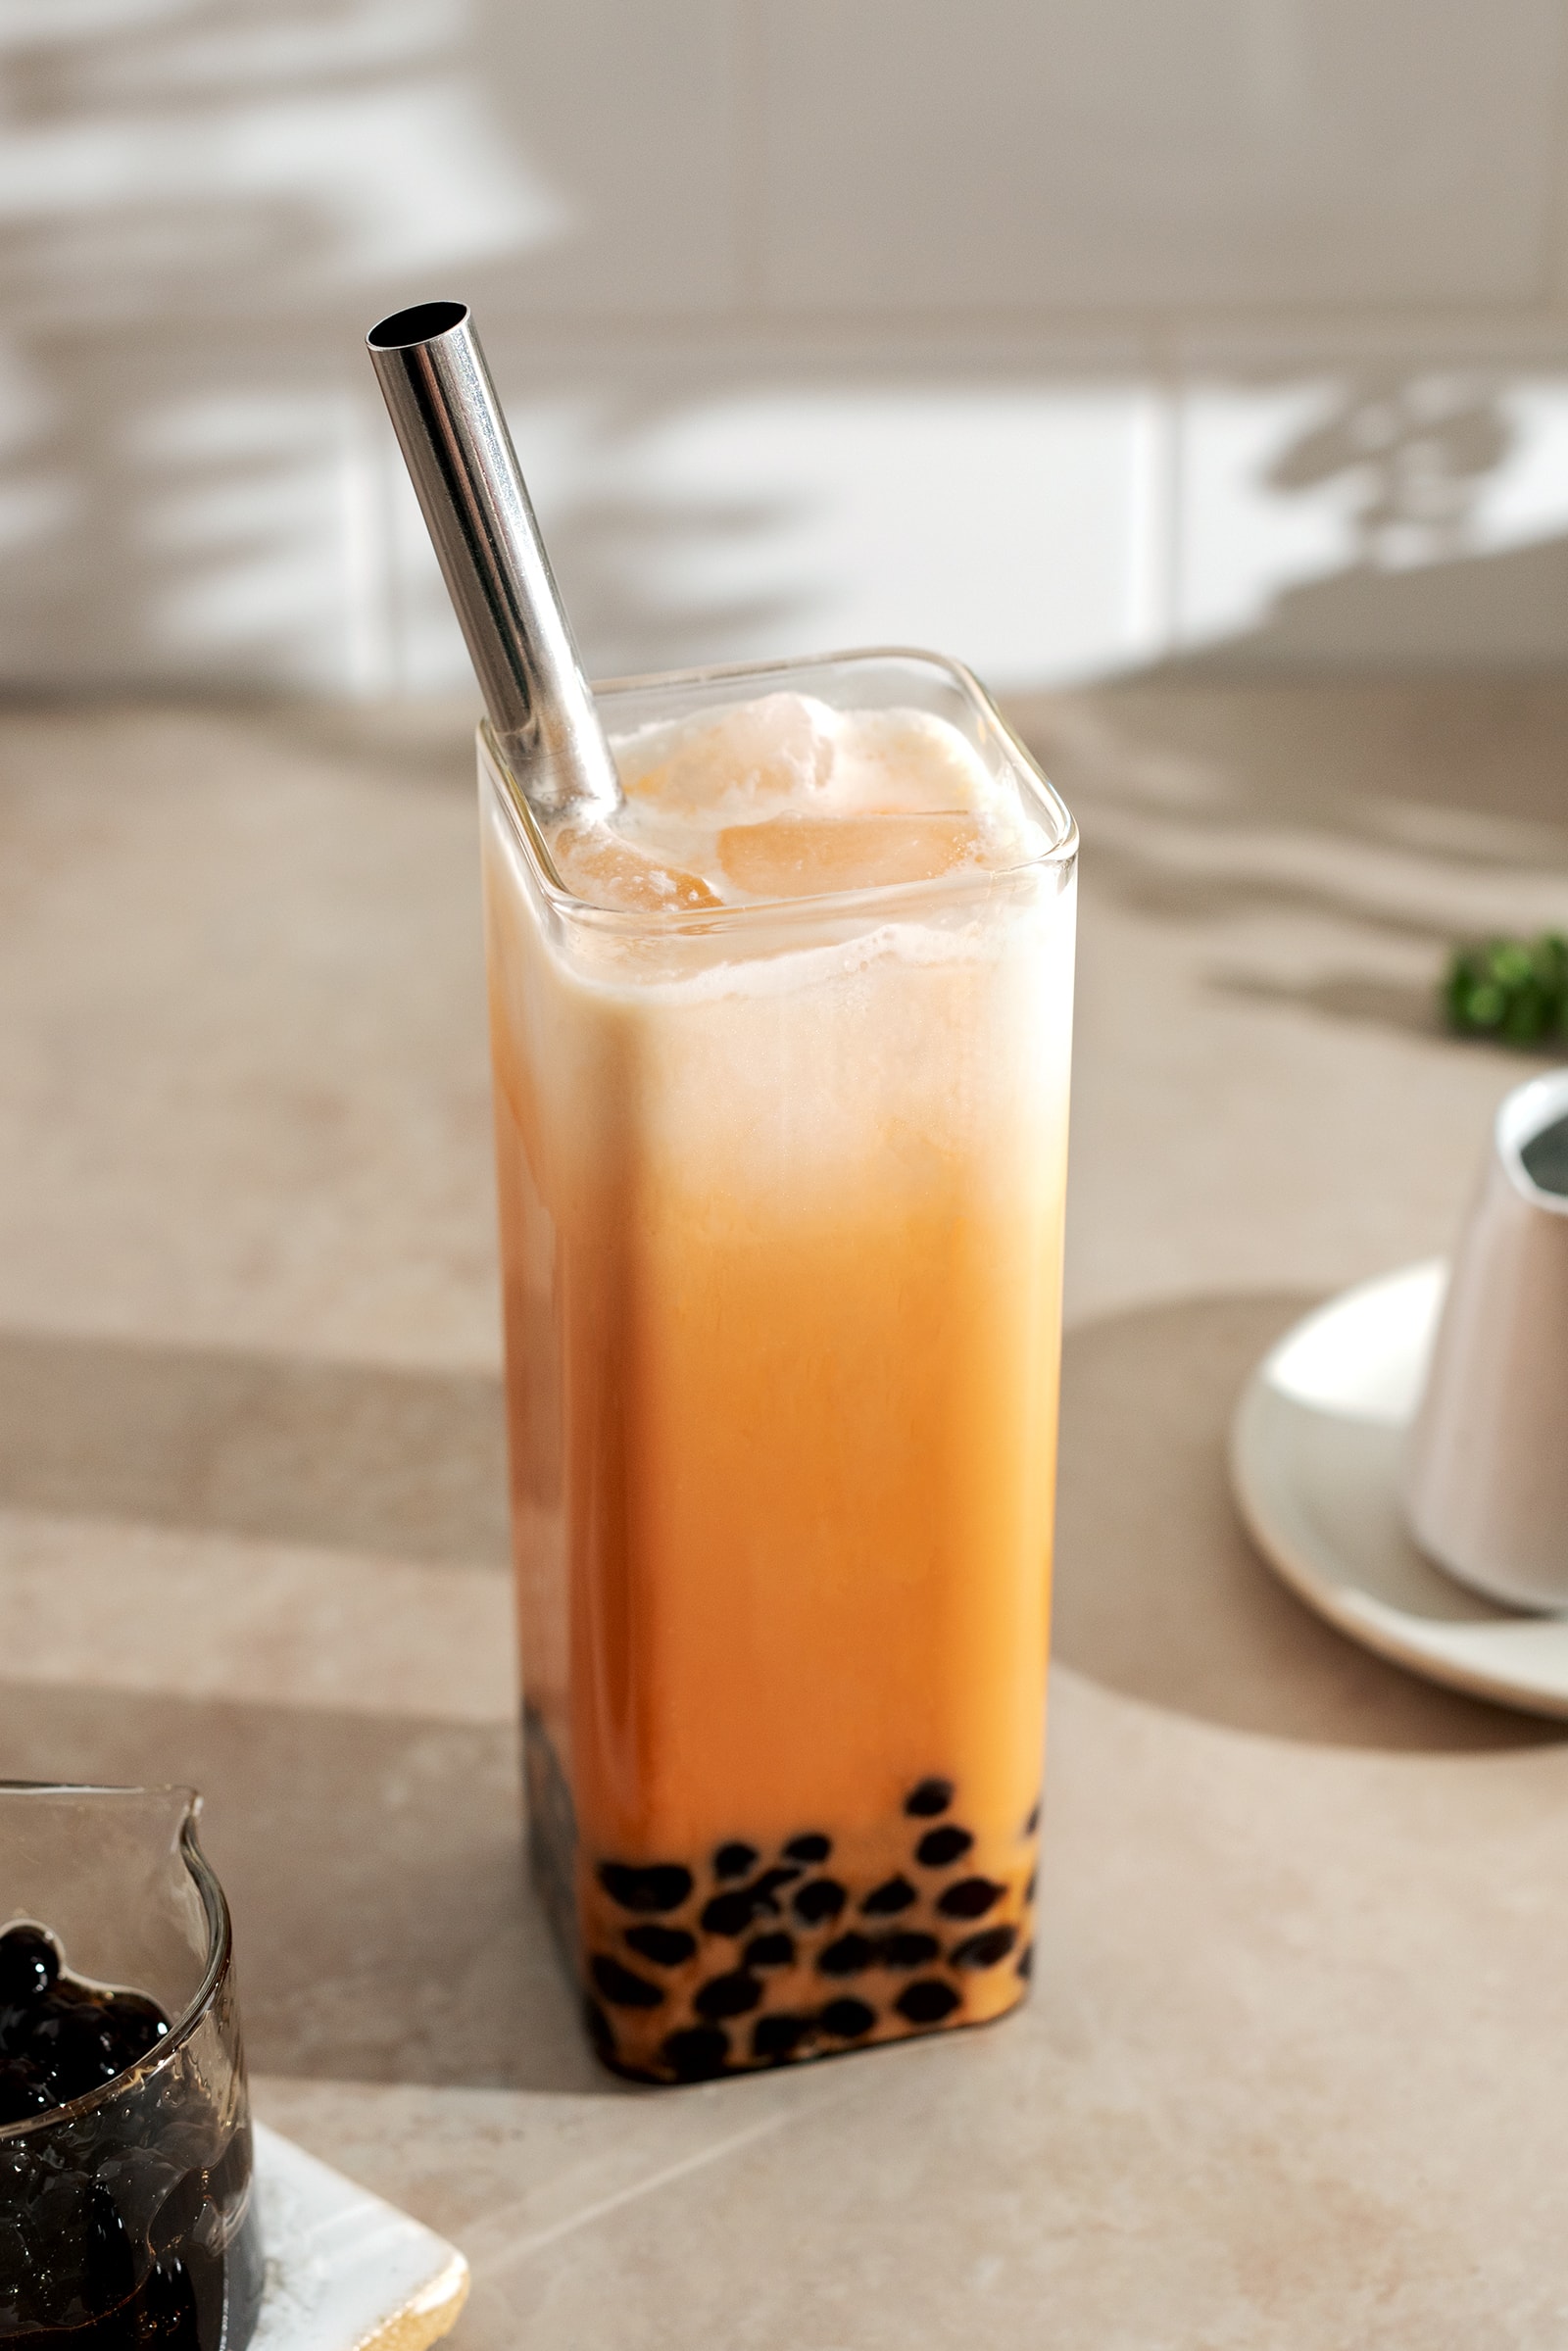 A glass of thai milk tea with boba pearls at the bottom and a layer of cream on top with a metal straw.